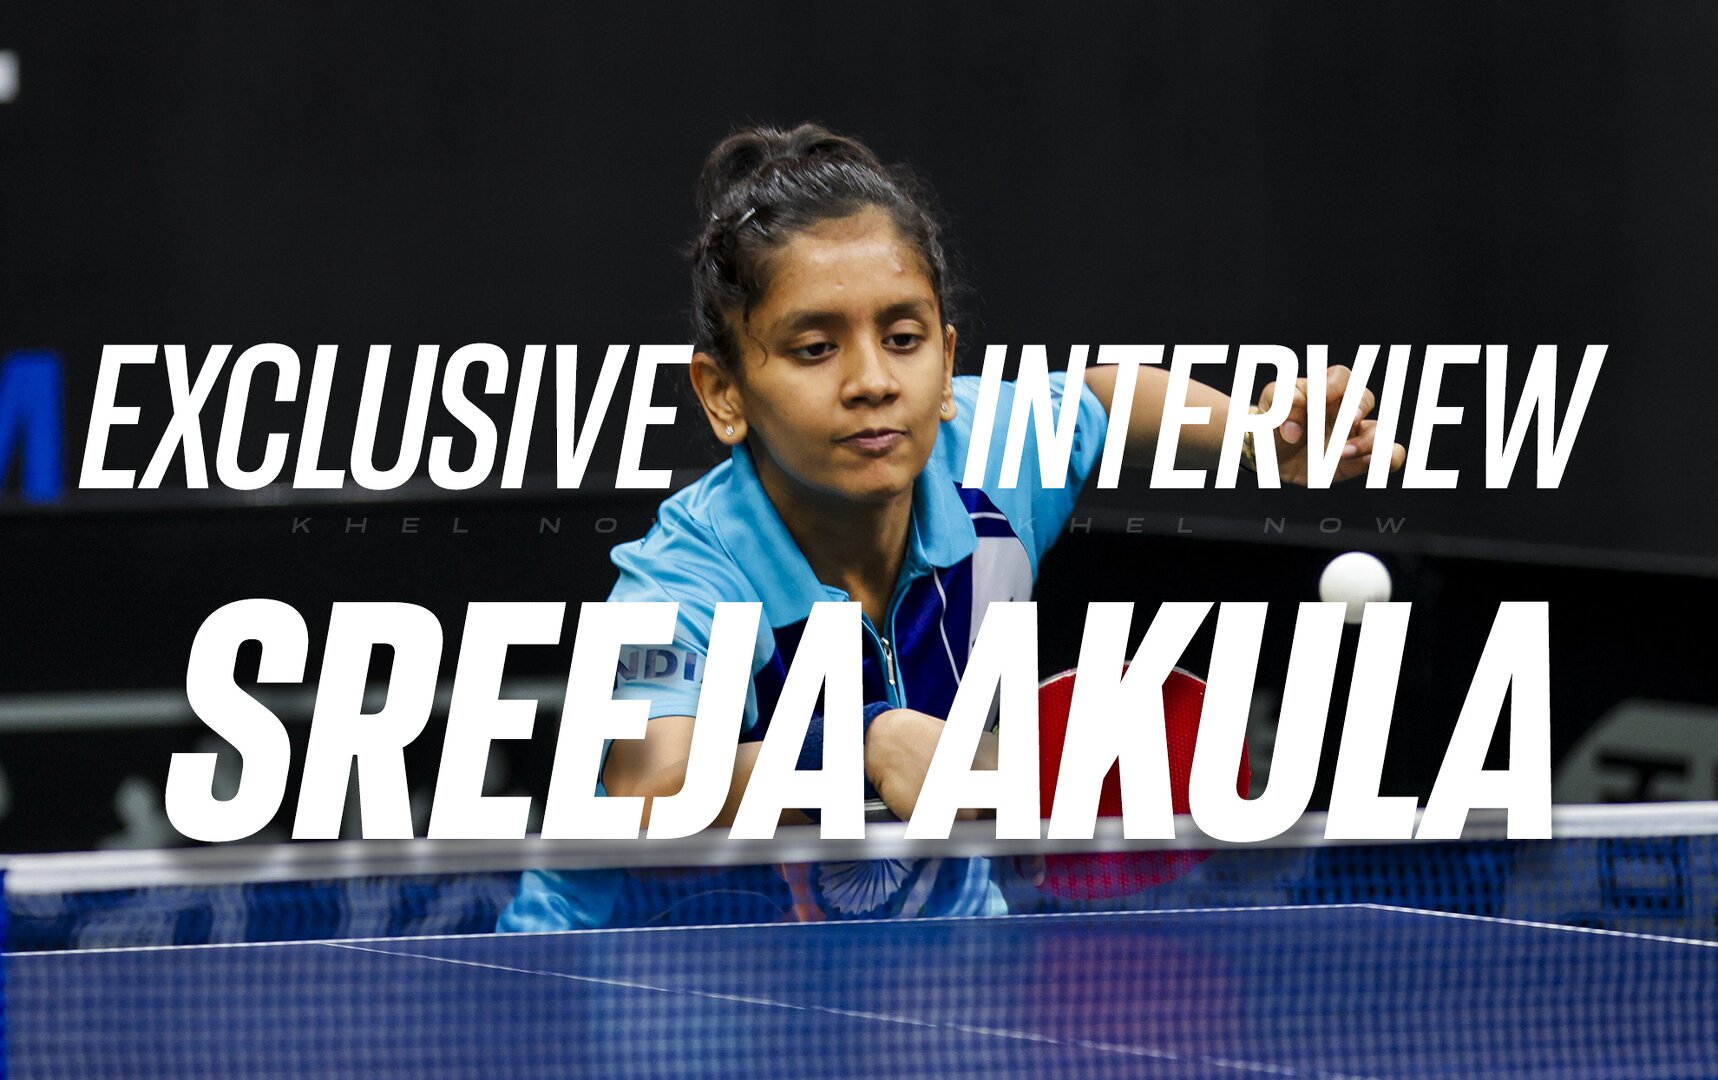 'I want to get into the top 10 in the future', TT sensation Sreeja Akula has set her sights on breaking into the top 10